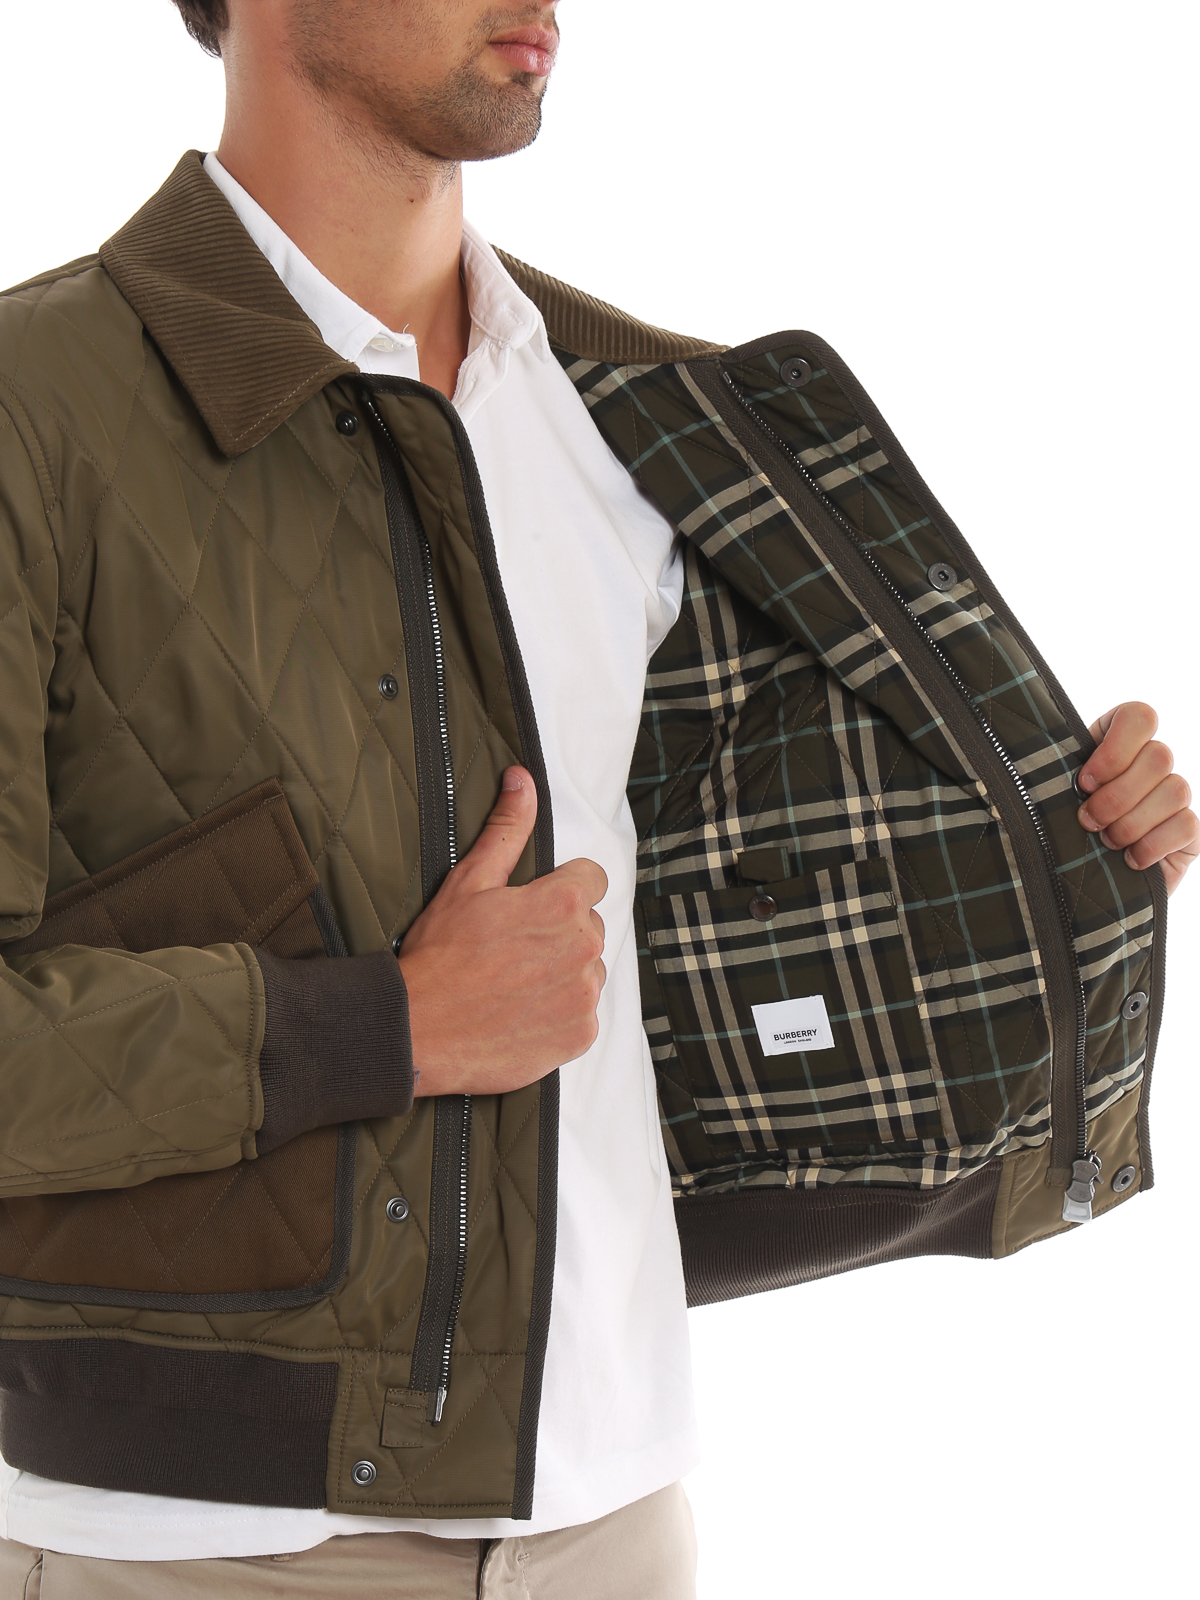 burberry diamond quilted jacket mens